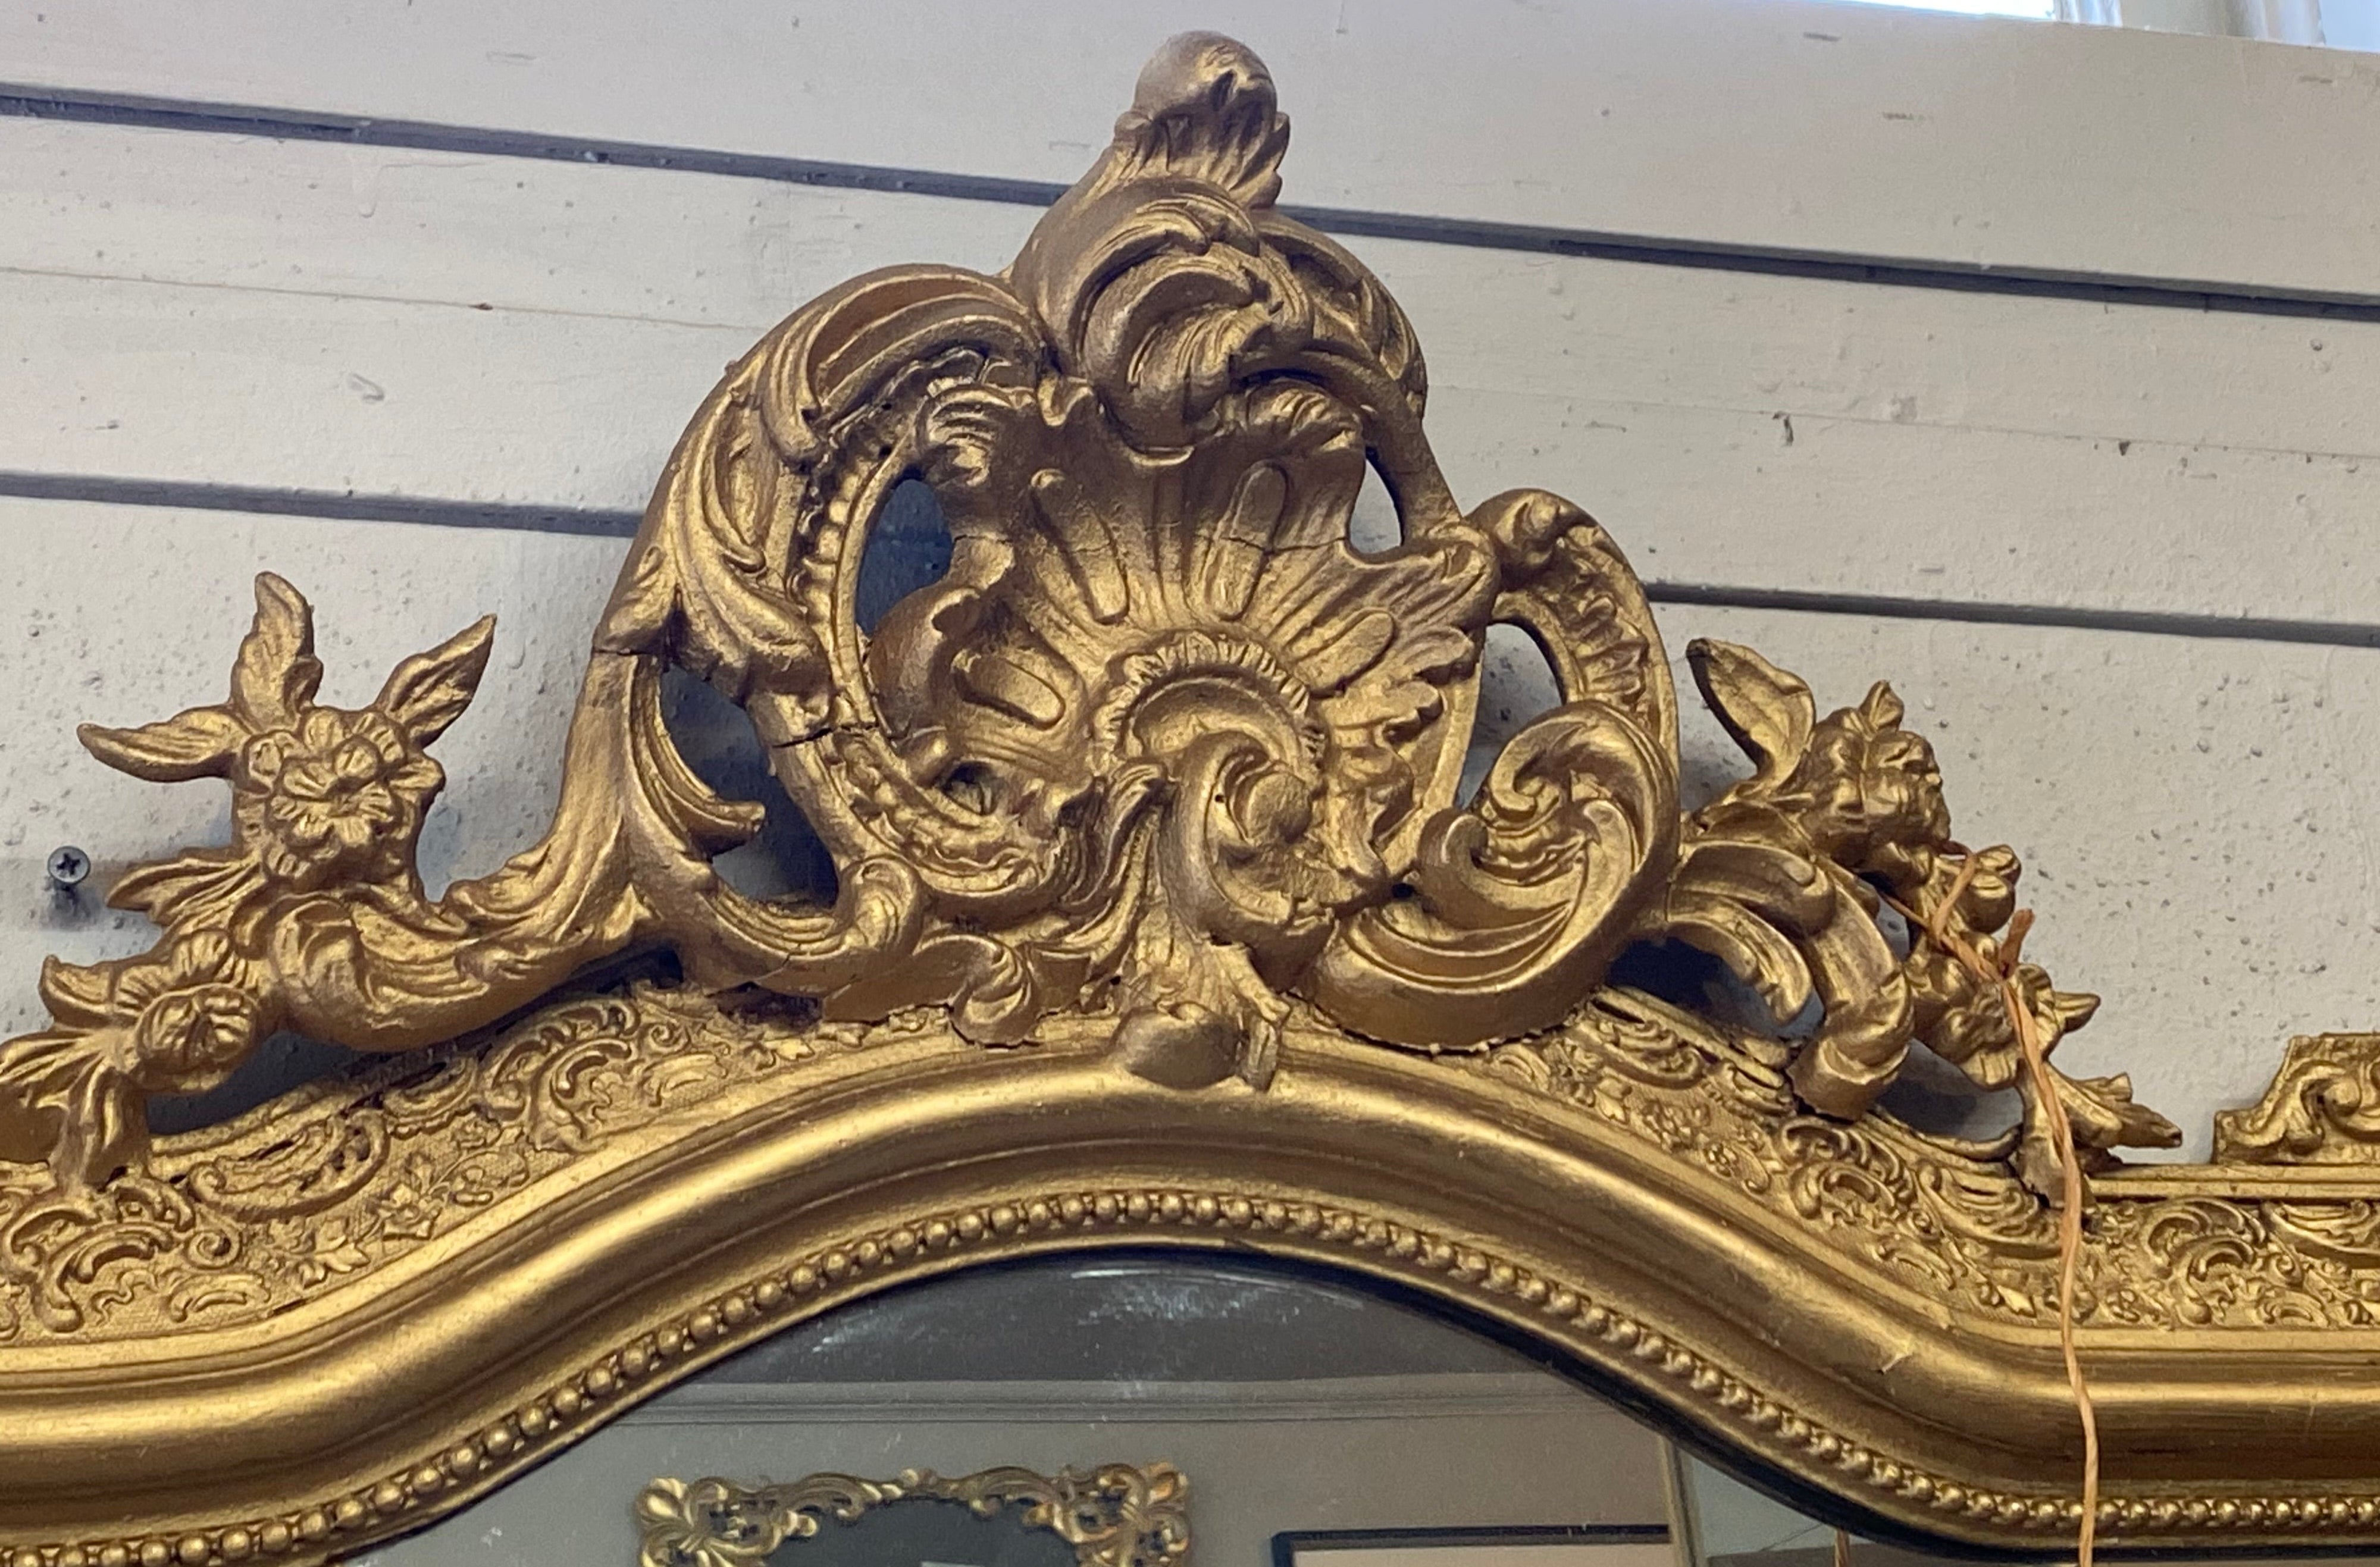 French Gilt Overmantle Mirror C. 1920s